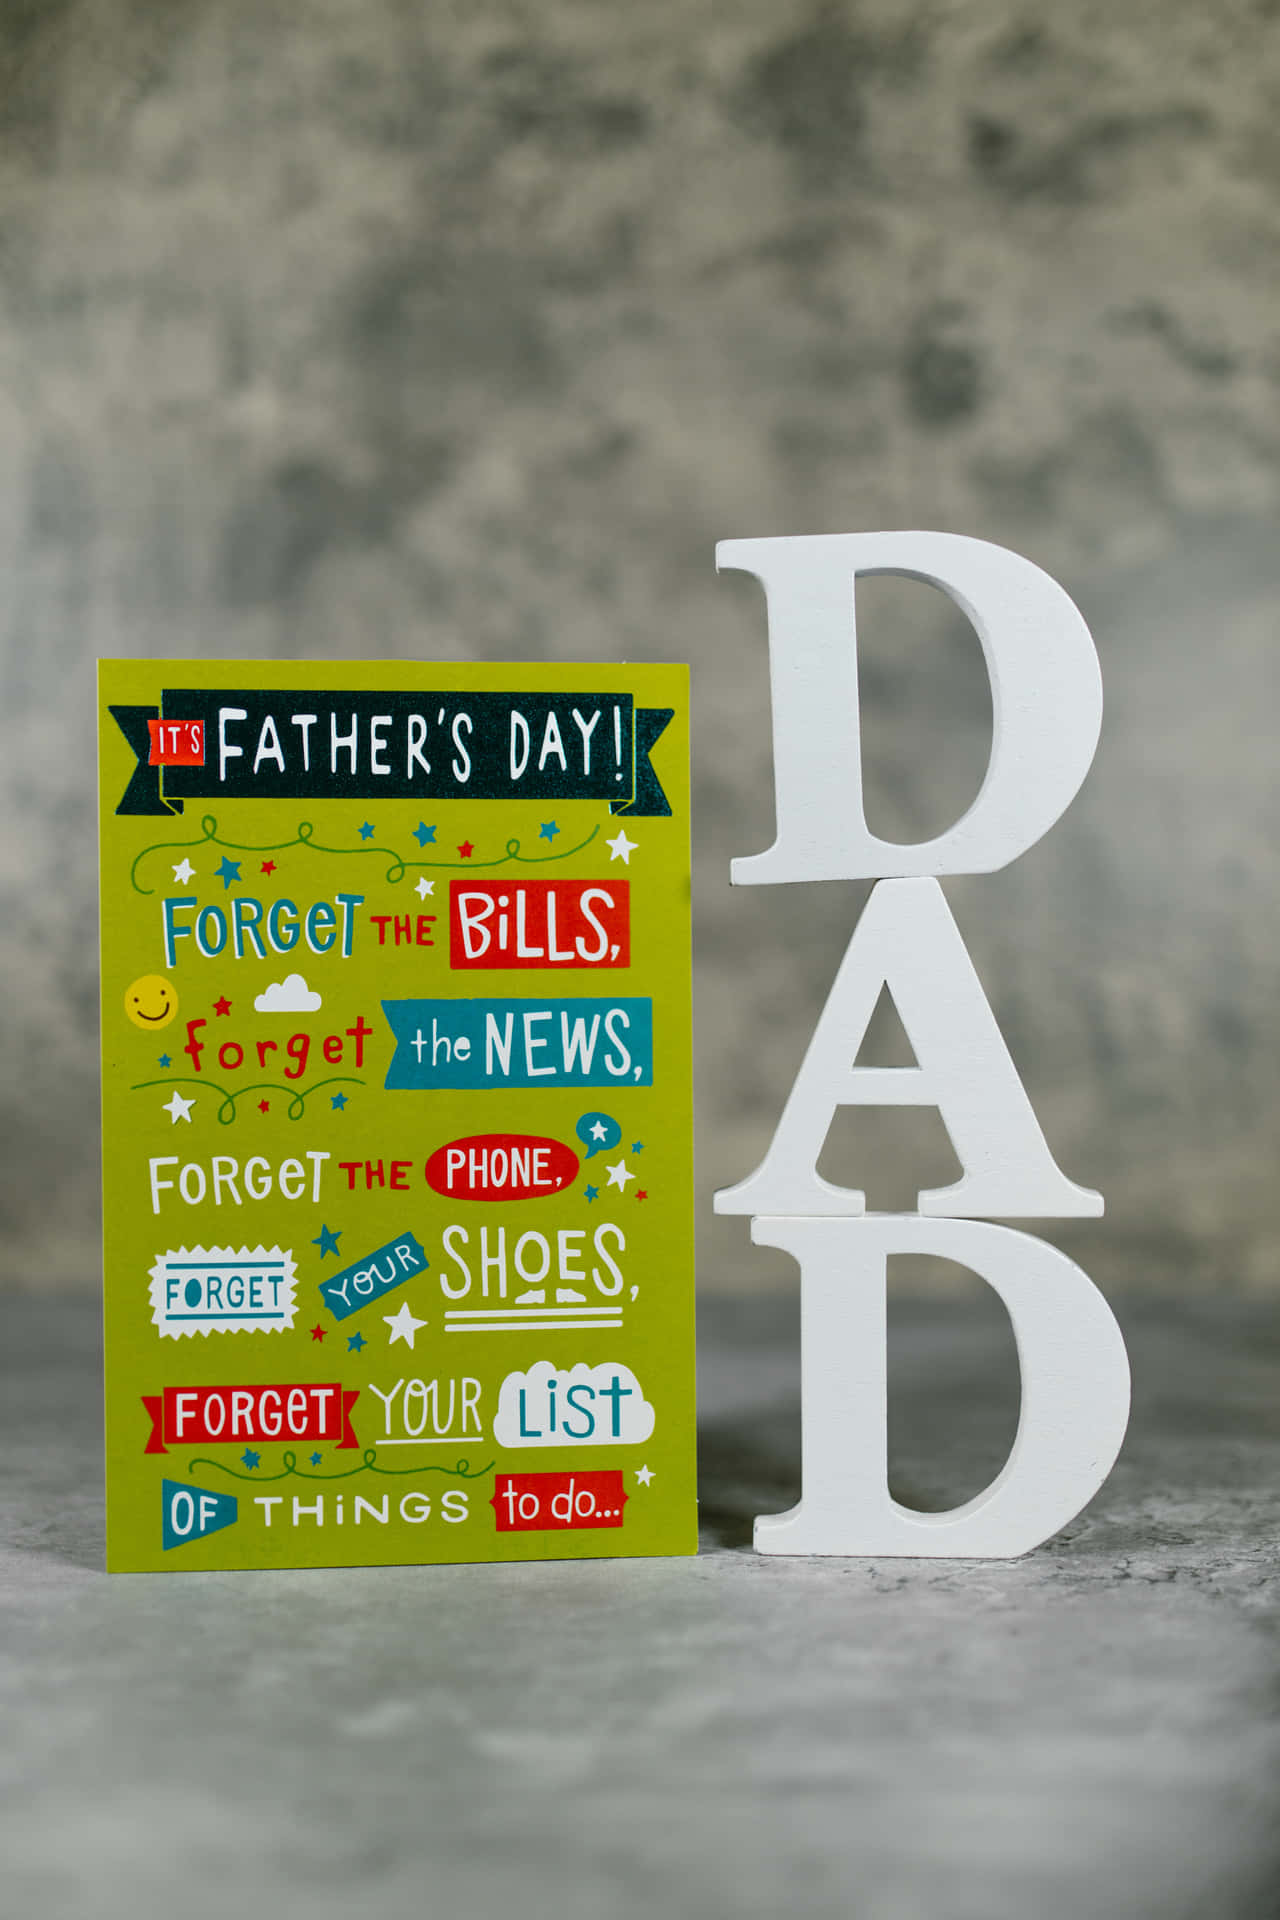 Celebrate this Fathers Day with love!